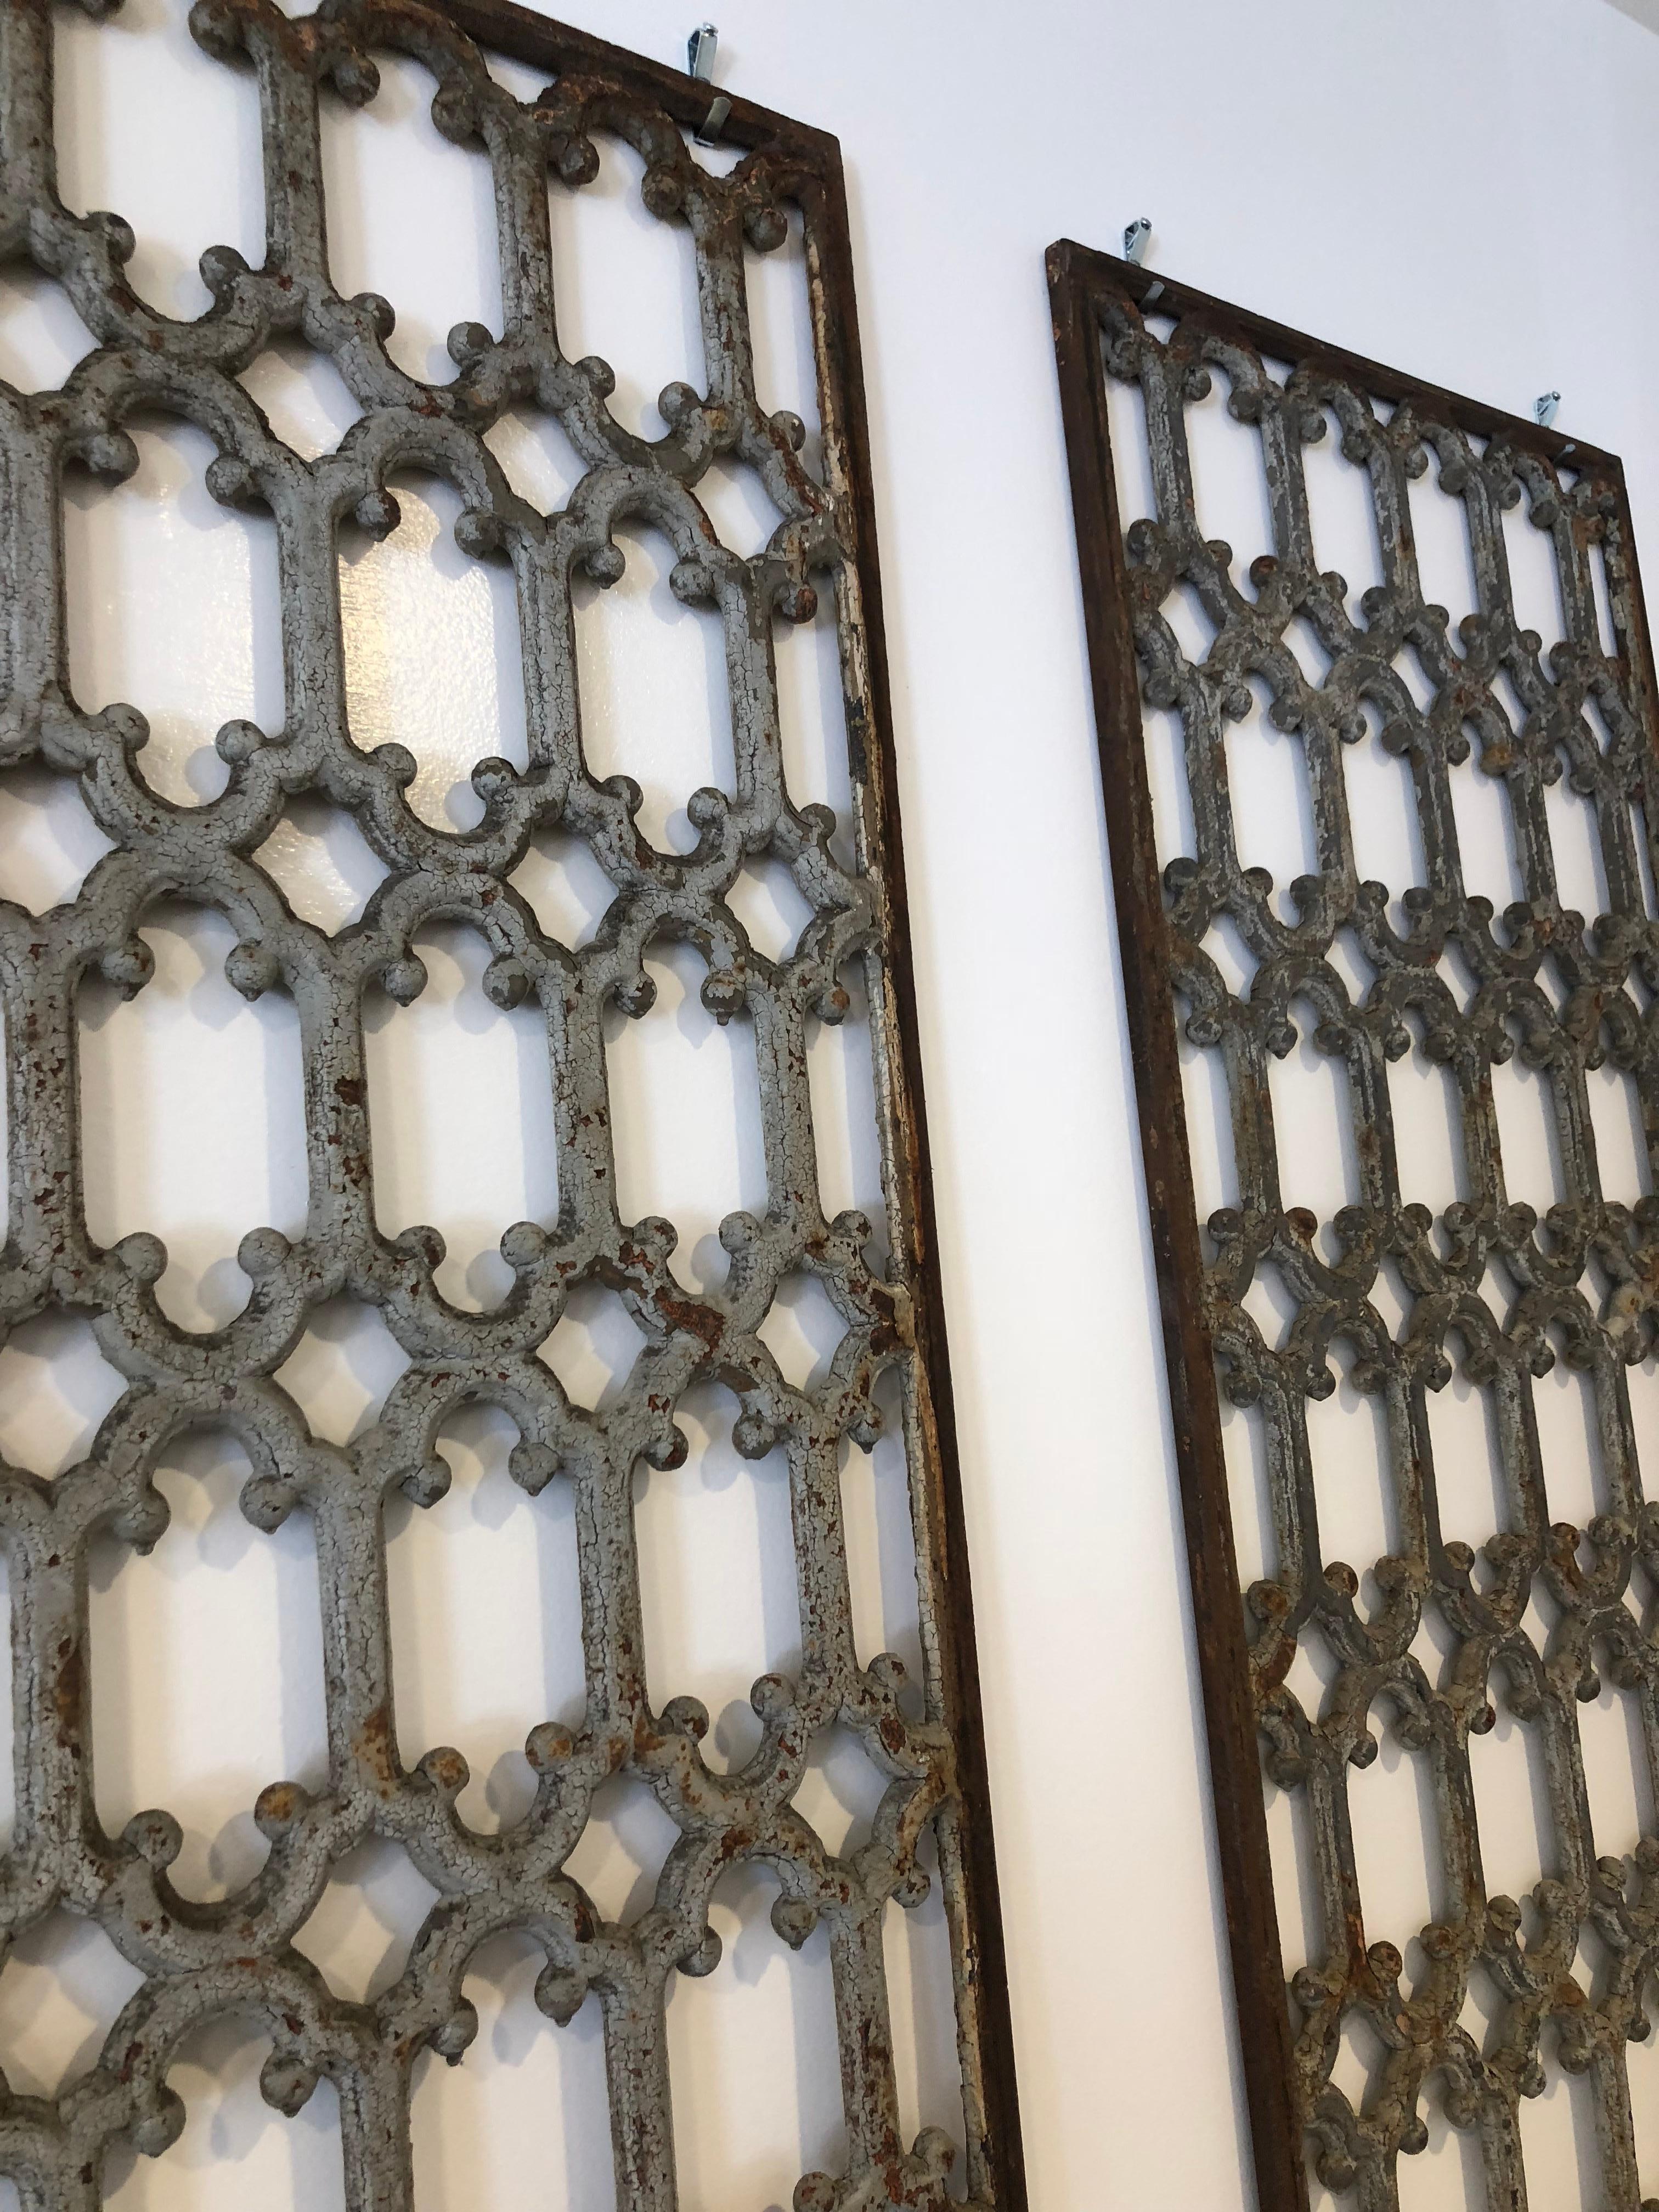 Pair of iron grids with scroll pattern, possible from a gate or window panel. Pretty blue or grey color with patina. They are highly decorative and would work in a variety of settings.